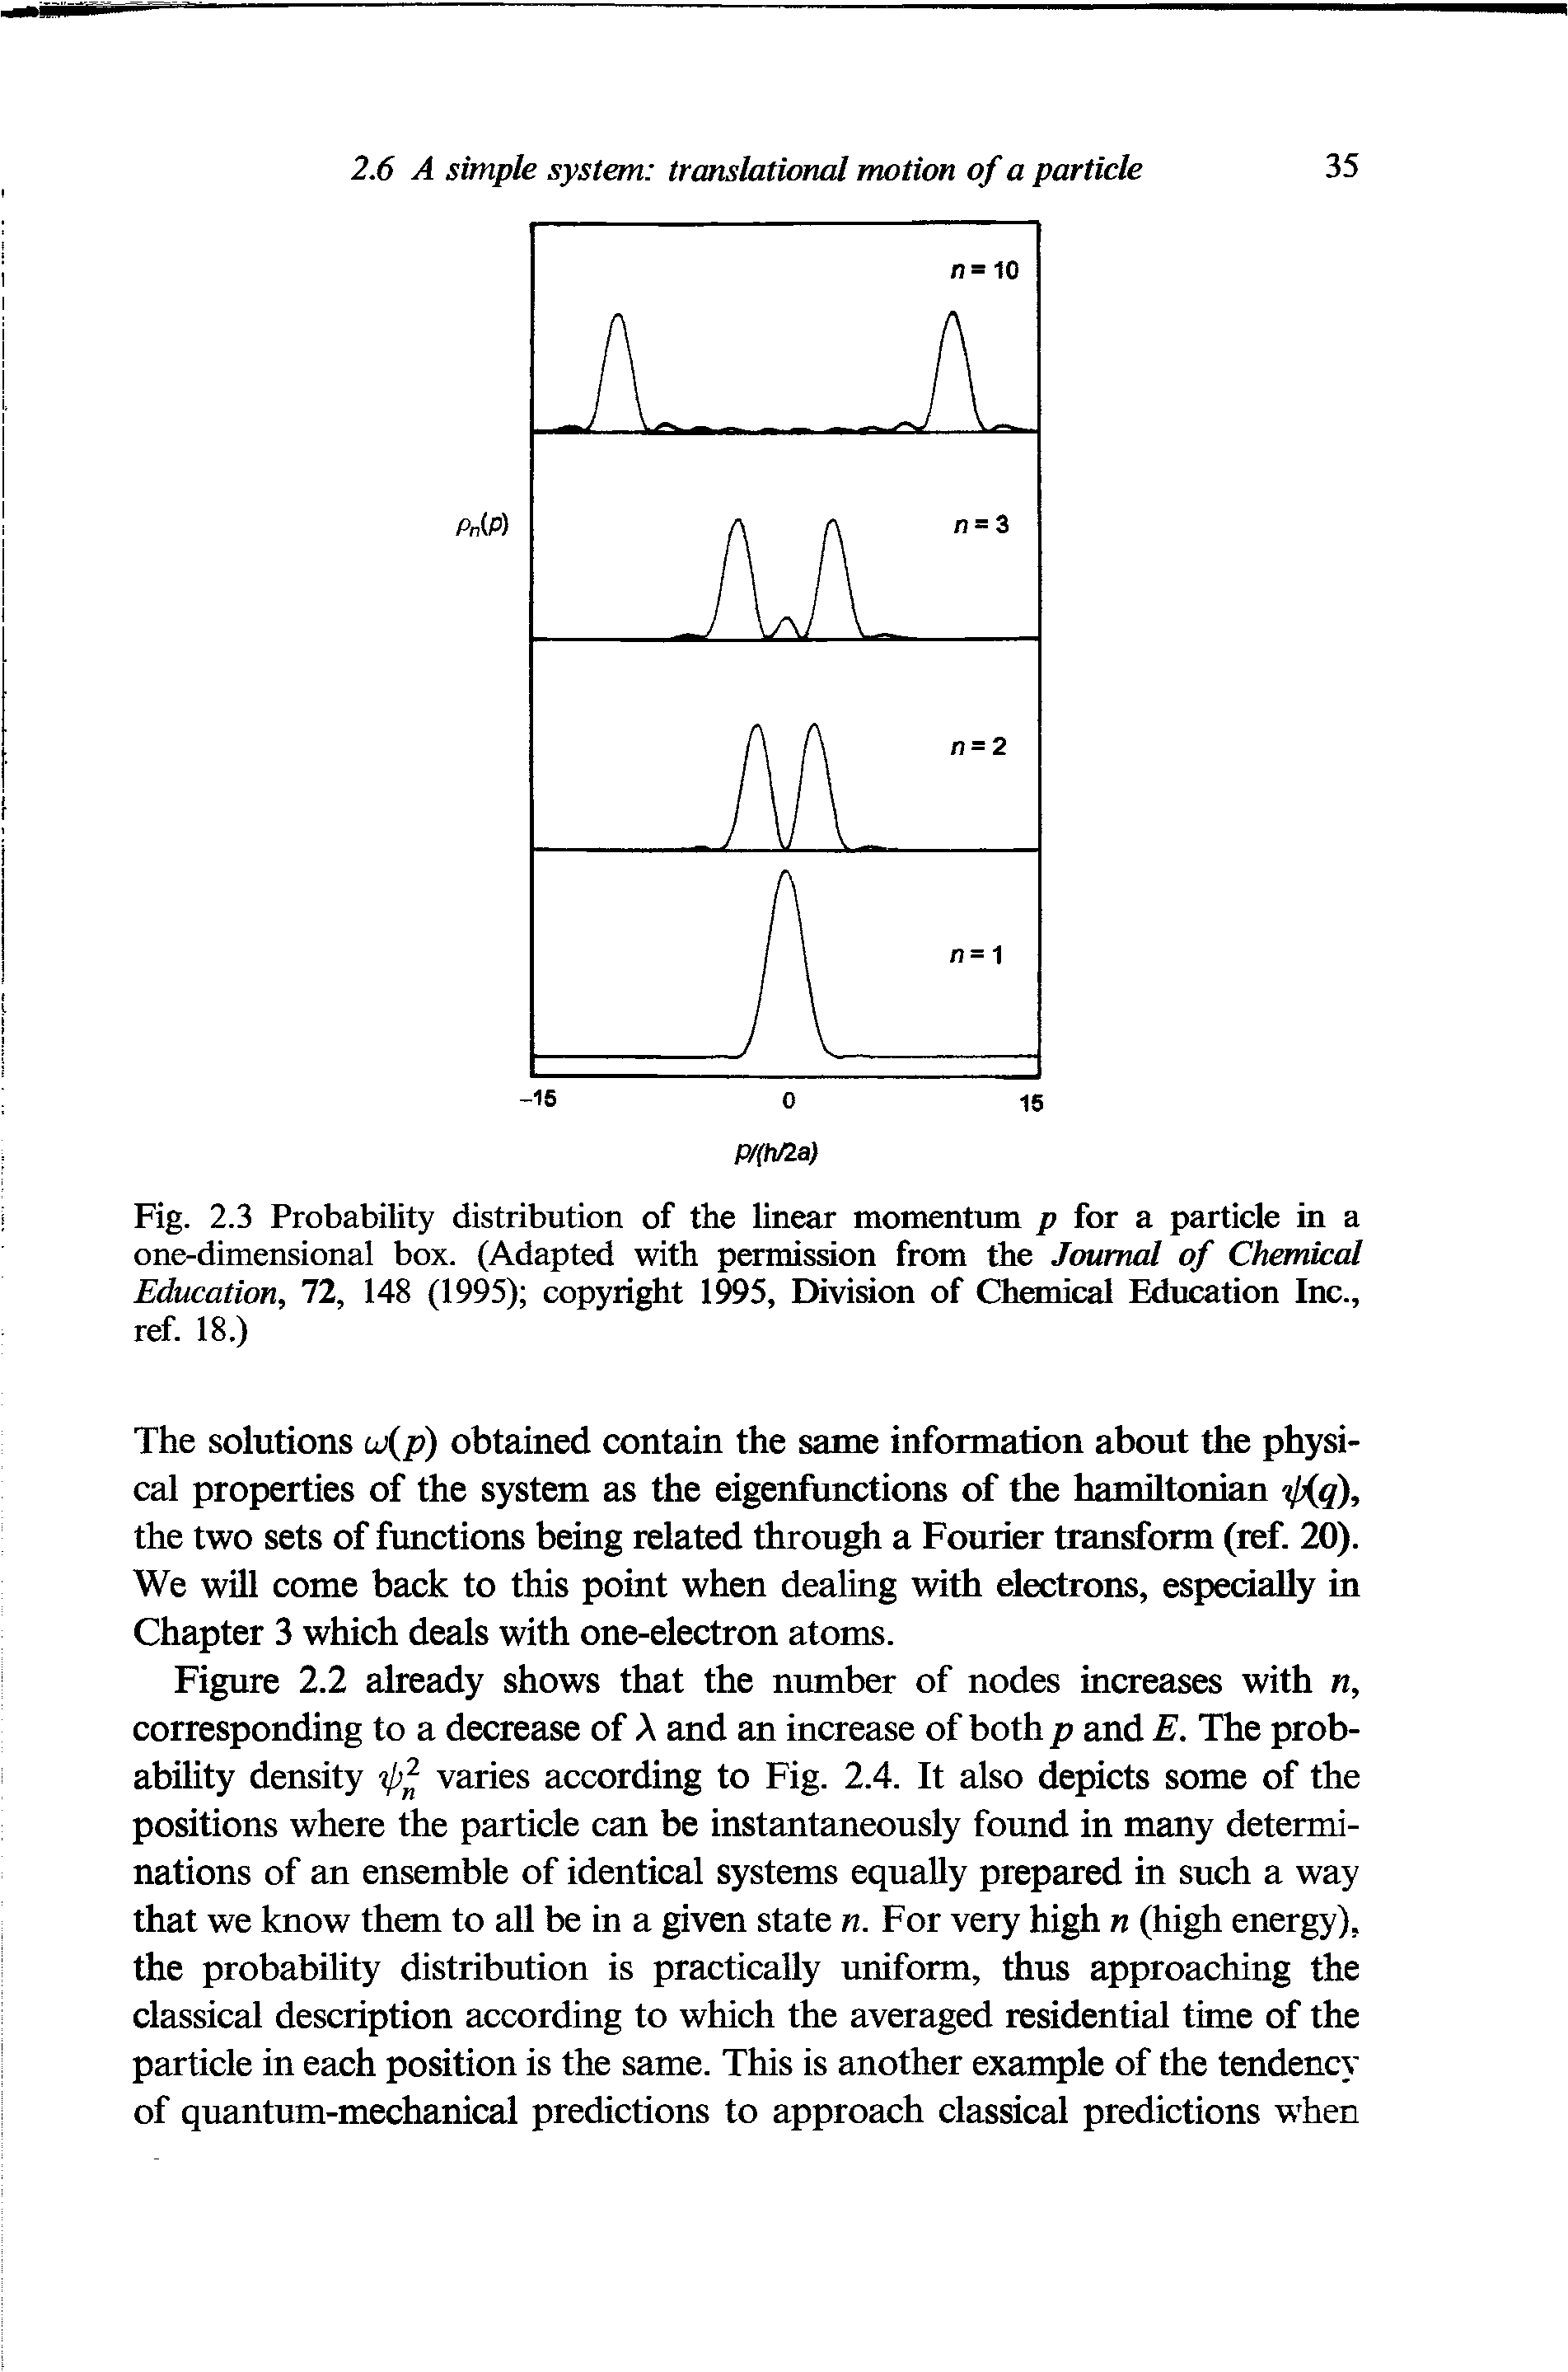 Fig. 2.3 Probability distribution of the linear momentum p for a particle in a one-dimensional box. (Adapted with permission from the Journal of Chemical Education, 72, 148 (1995) copyright 1995, EMvision of Chemical Education Inc., ref. 18.)...